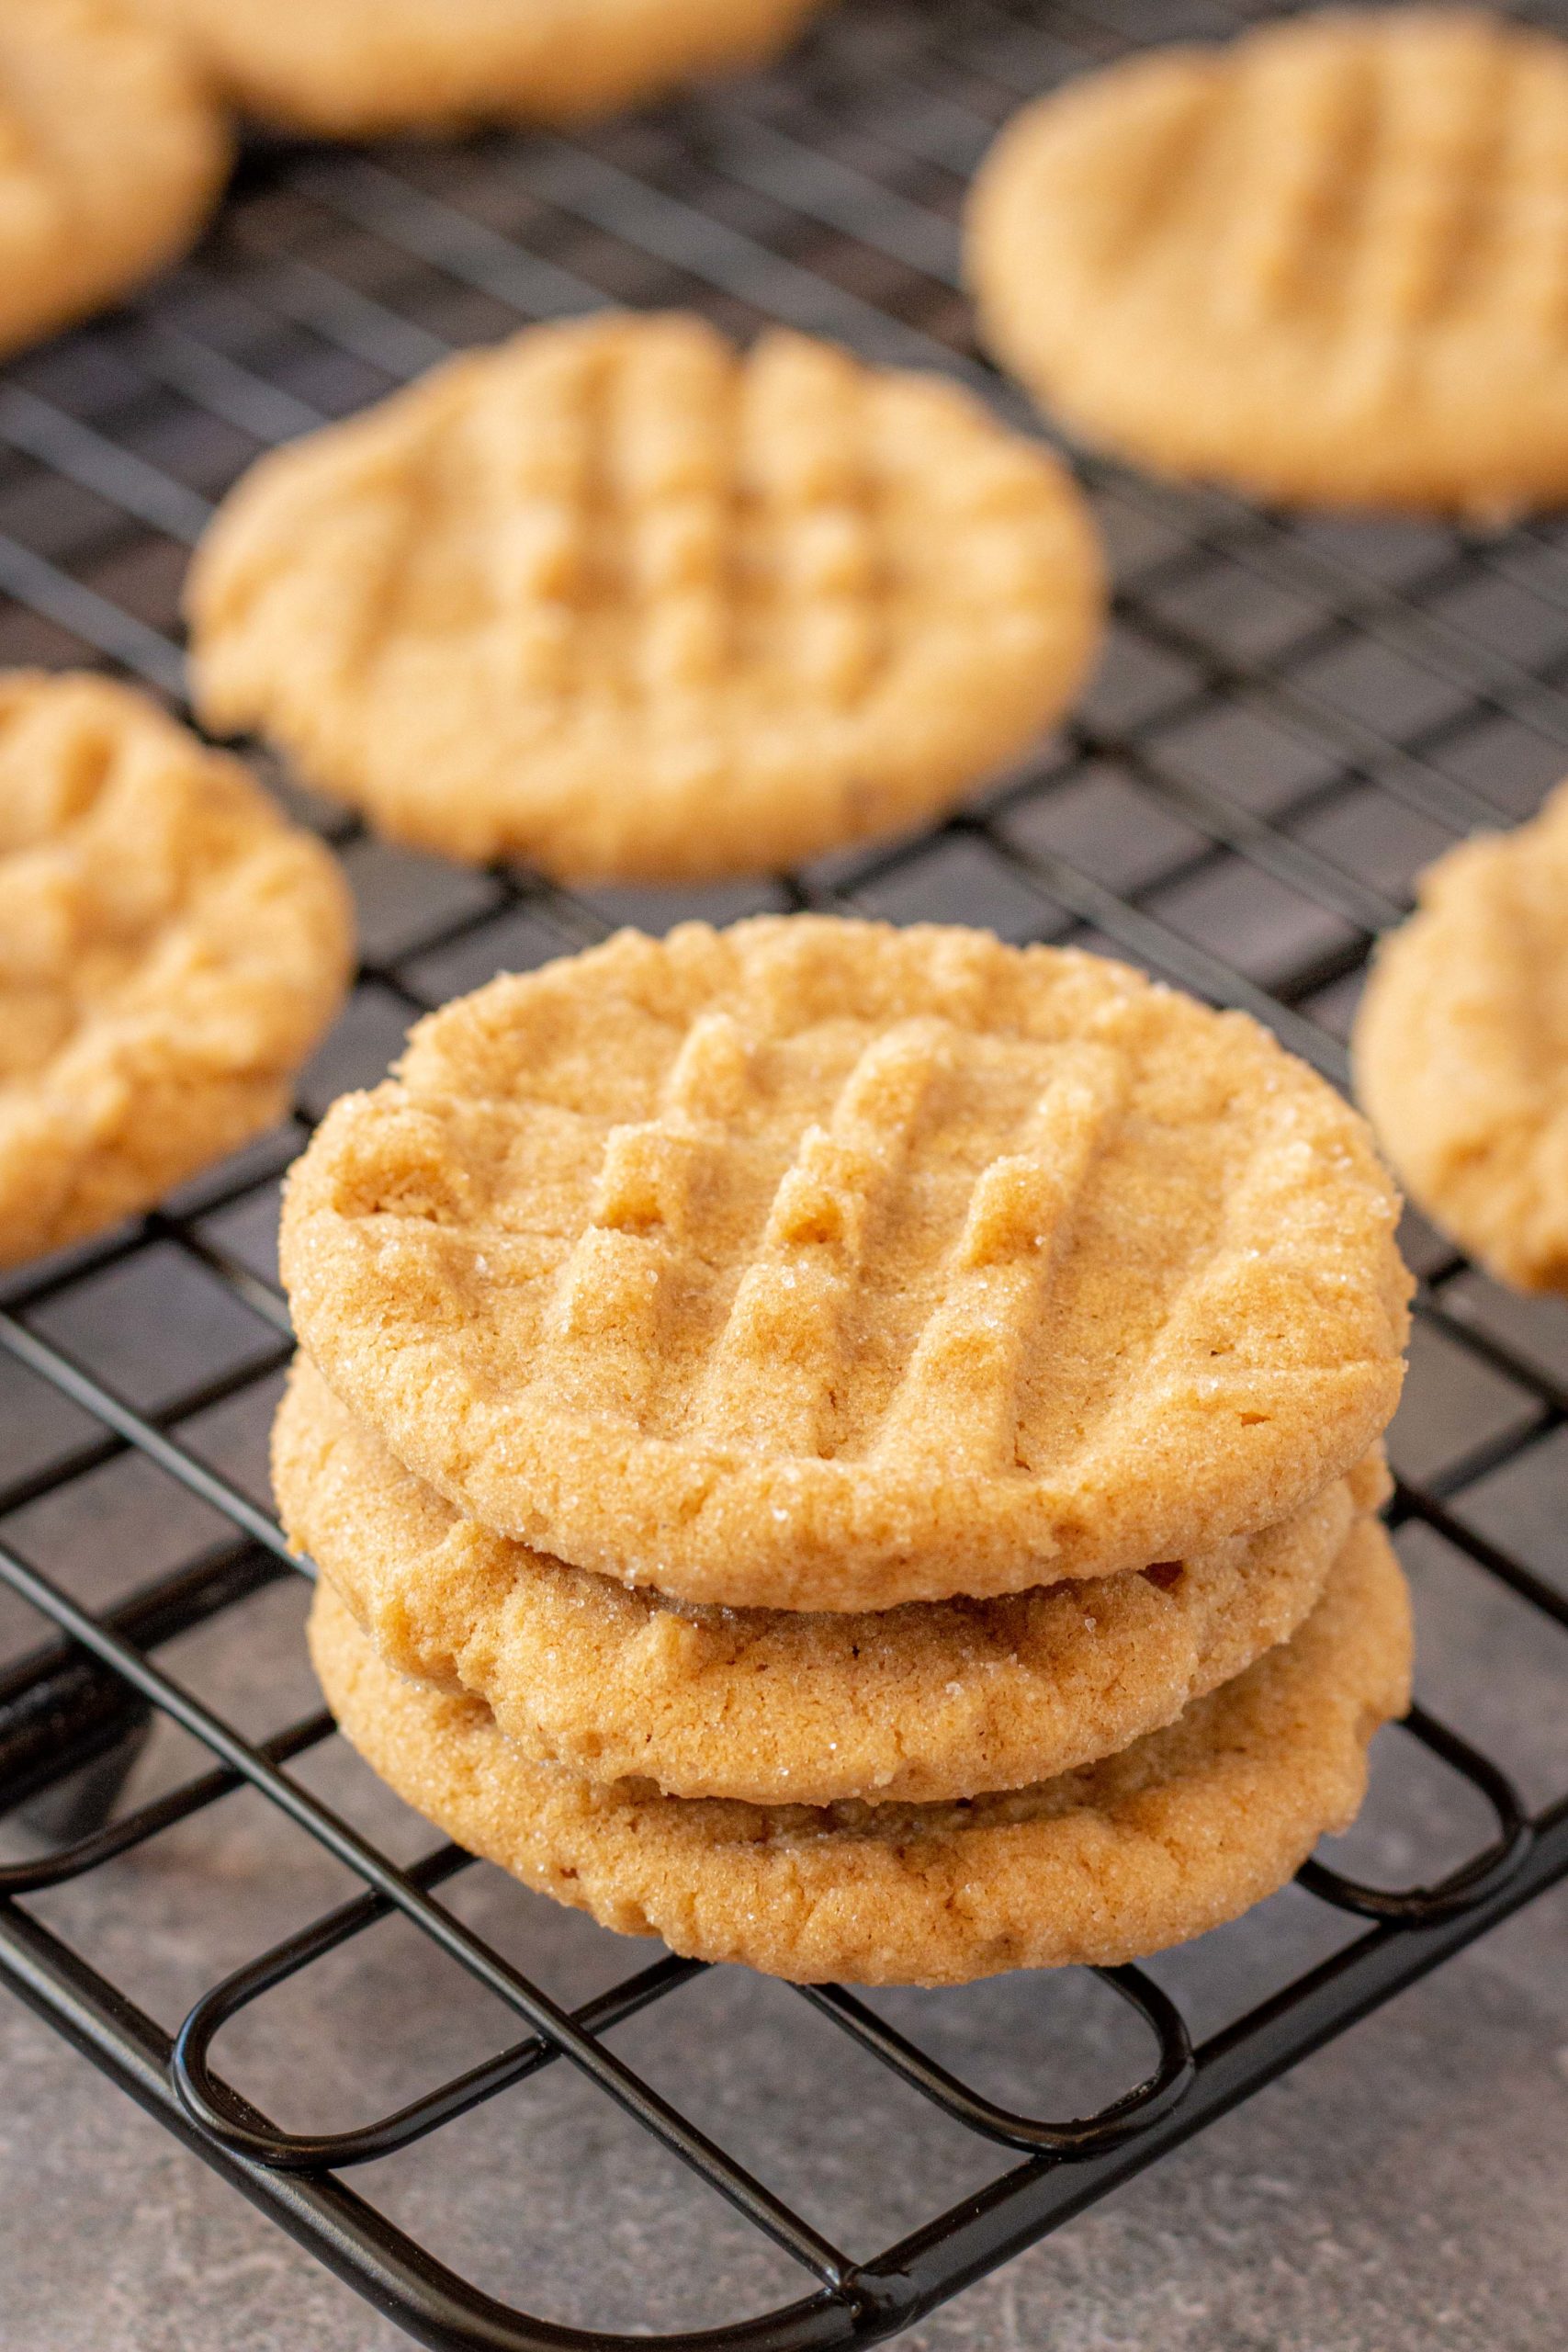 https://thereislifeafterwheat.com/wp-content/uploads/2023/02/Gluten-Free-Peanut-Butter-Cookies-2-scaled.jpg